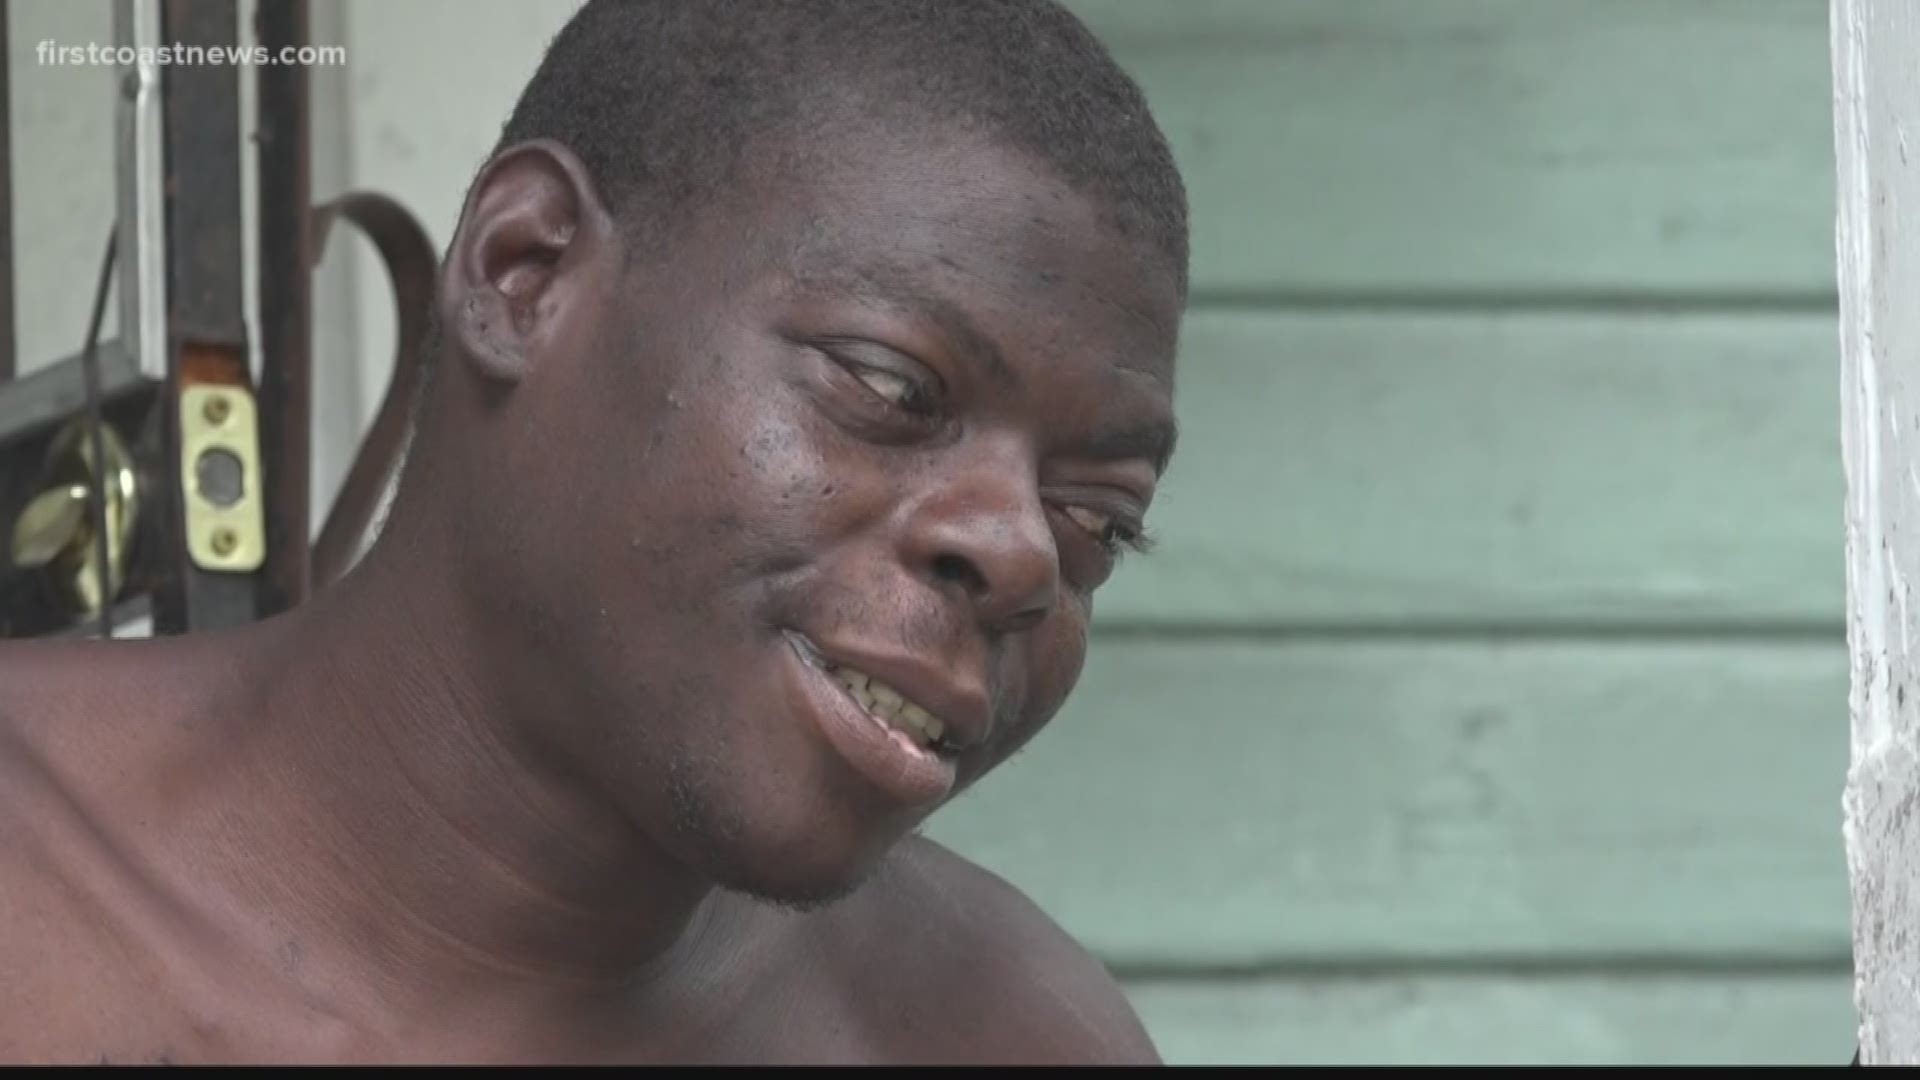 Up until a few days ago, Anthony, 36, had been living on the streets of Jacksonville for more than a decade.